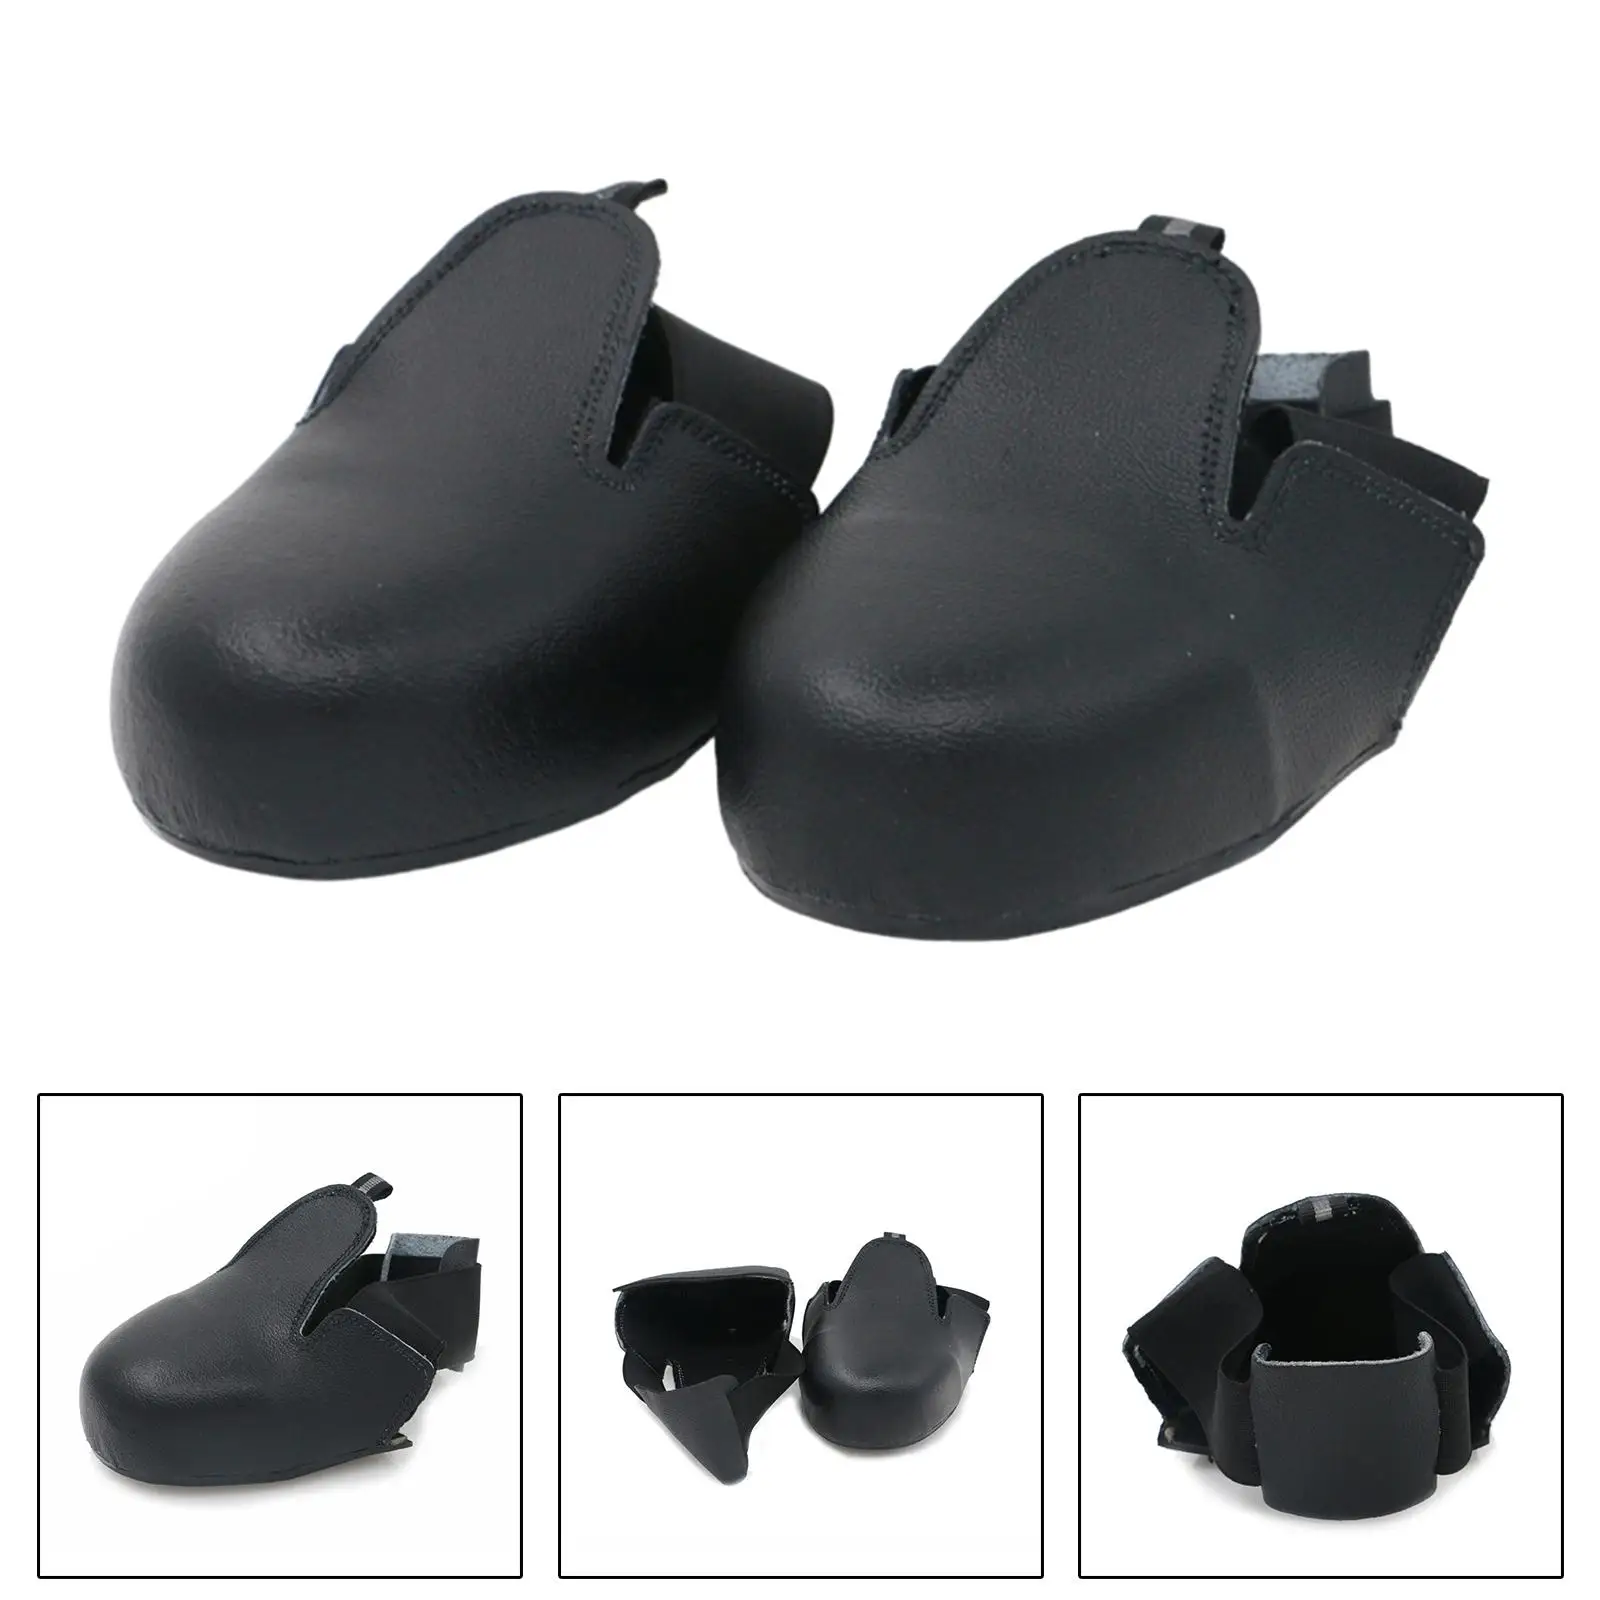 Toe Cap Safety Overshoes Universal Anti Smashing Guards Covers for Industry and Workplace Protection PU Leather Overshoes Cover